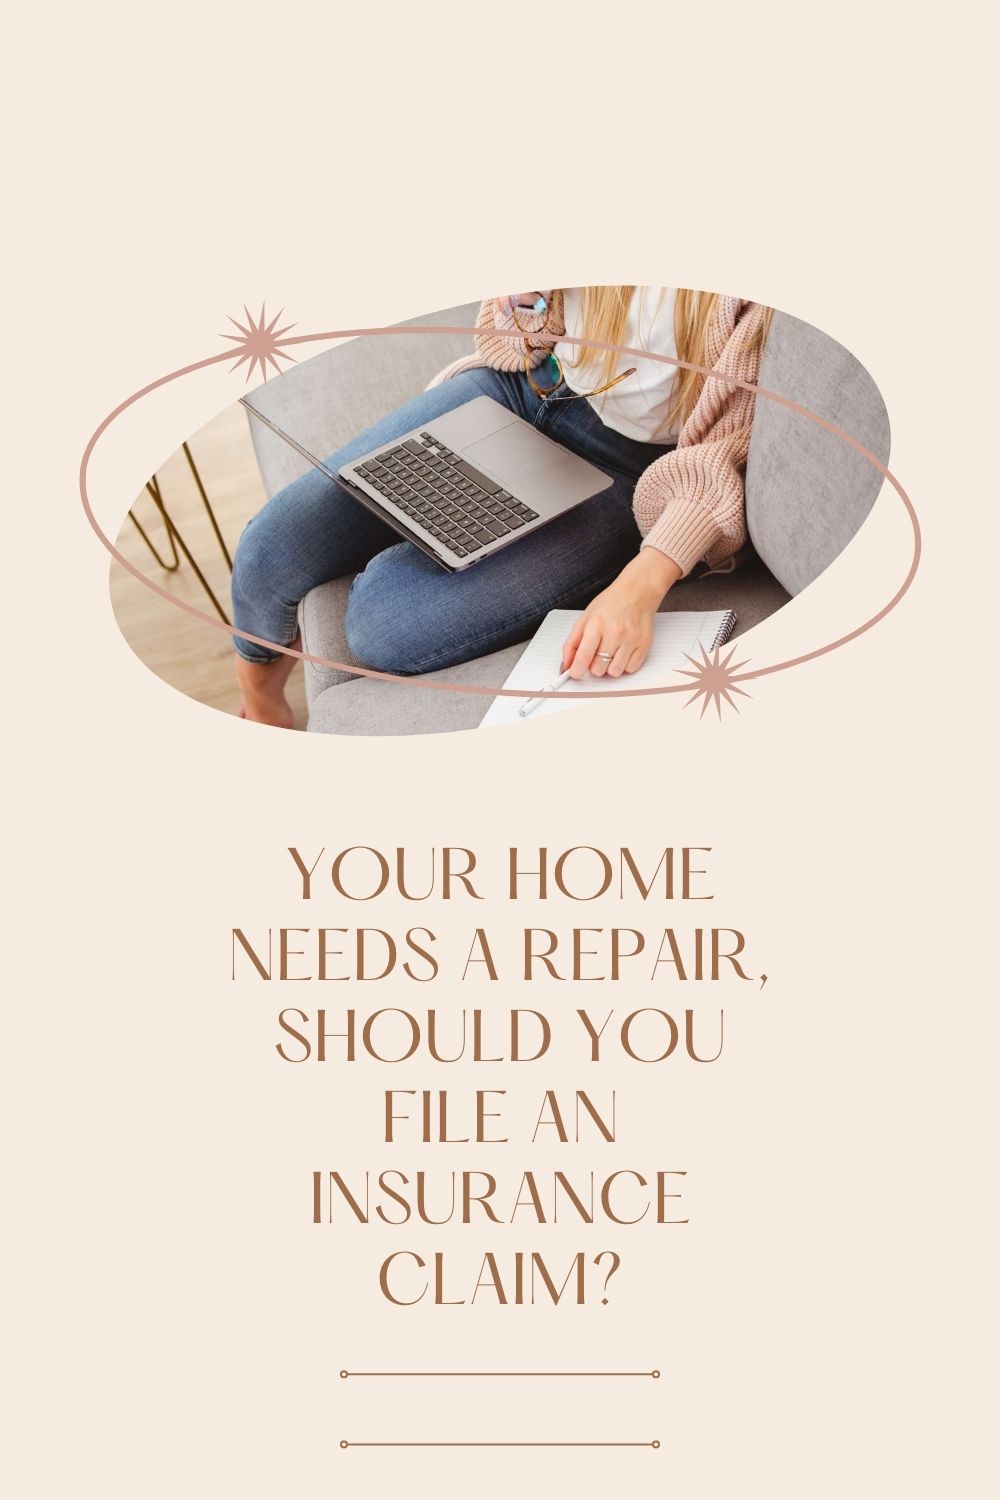 Your Home Needs a Repair, Should You File an Insurance Claim?